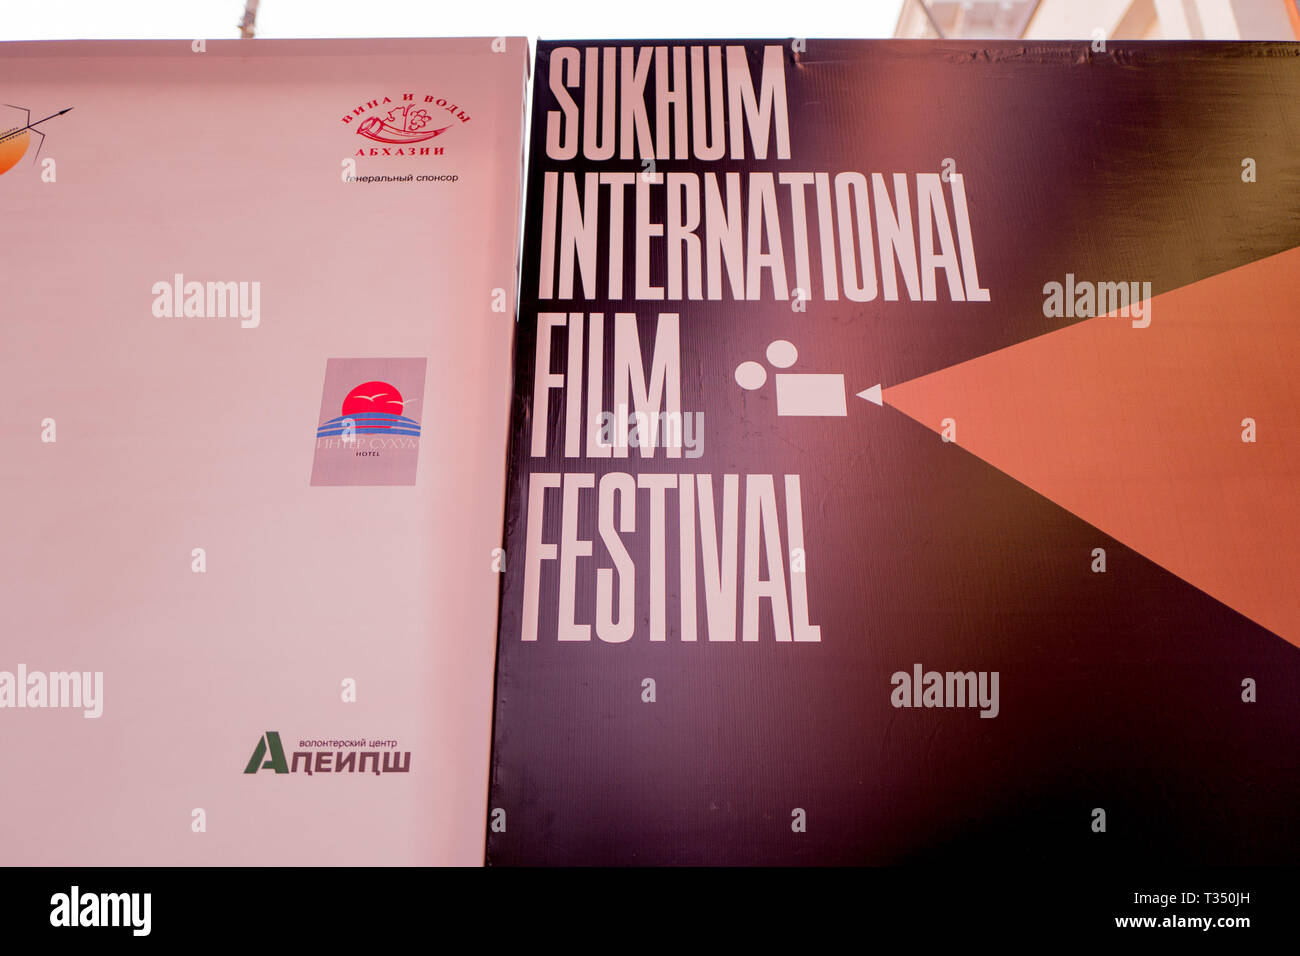 Sukhum, Abkhazia. April 4, 2019 - Sukhum, Republic of Abkhazia - II Sukhum International Film Festival (SIFF) is held in Abkhazian capital from 4 to 8 of April. The program consists of short fiction films lasting from 10 to 30 minutes. The festival's competition program will feature 30 short films from Abkhazia, Russia, Europe, the Middle East and North Africa. Films will compete in the nominations ''Best Acting'', ''Best Screenplay'', ''Best Film'', ''Best Director's Work.'' The organizer of the Sukhum International Film Festival is the State Committee on Youth Policy of the Republic of Abkha Stock Photo